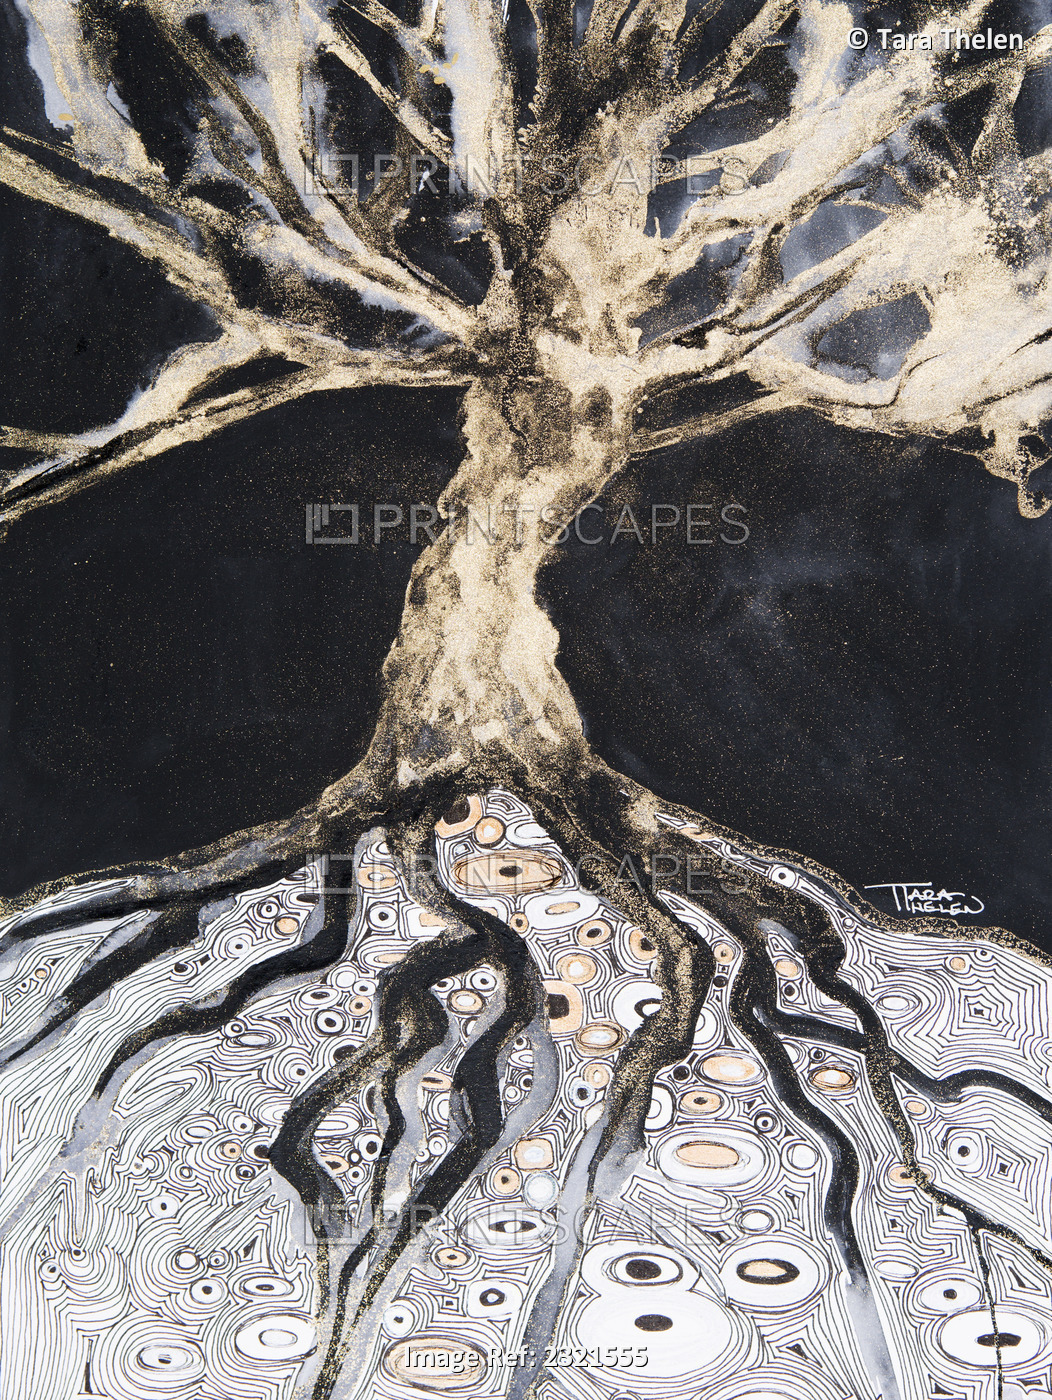 Abstract Watercolor Painting Of A Tree And Its Roots.